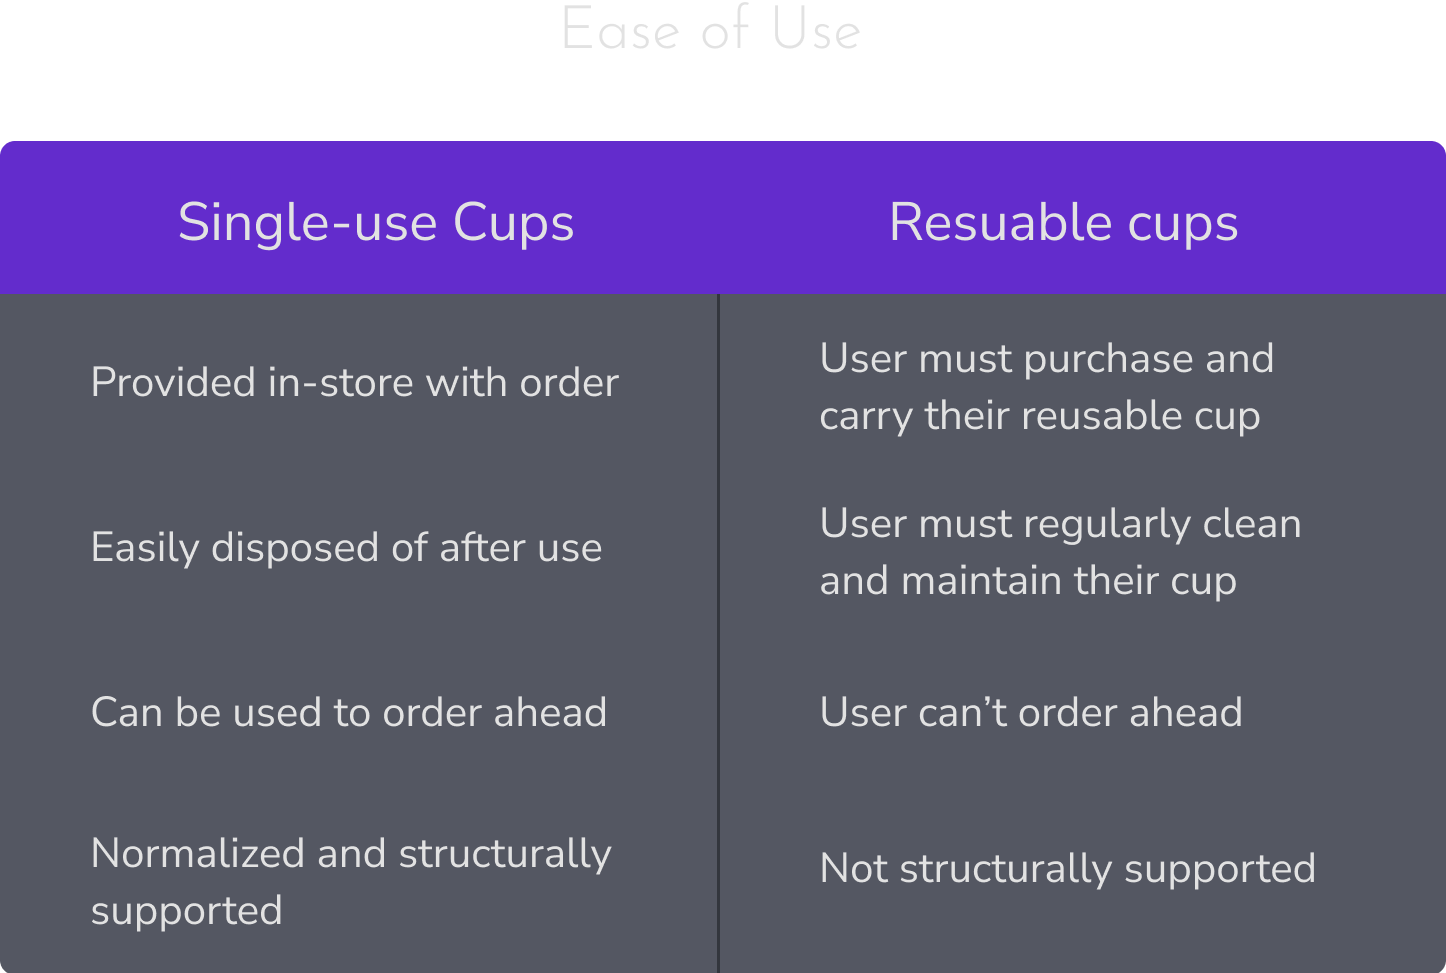 Reasons why single use cups are less convenient than reusable cups in public